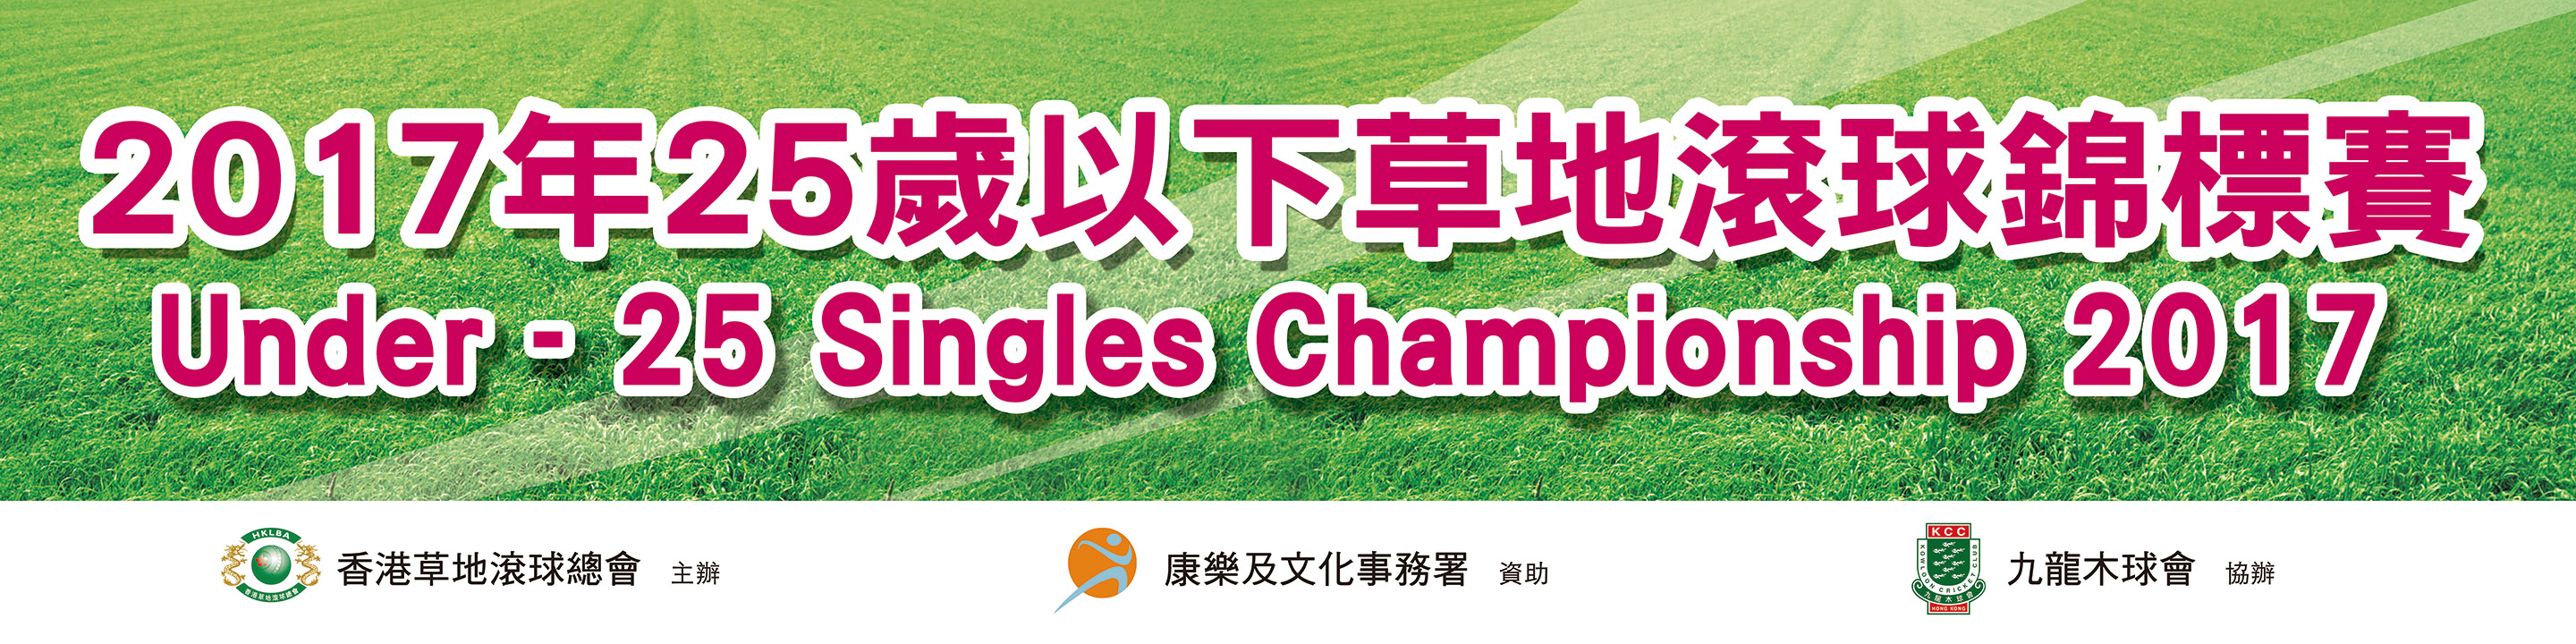 Under-25 Singles Championship 2017 (Updated on 28/11/17)